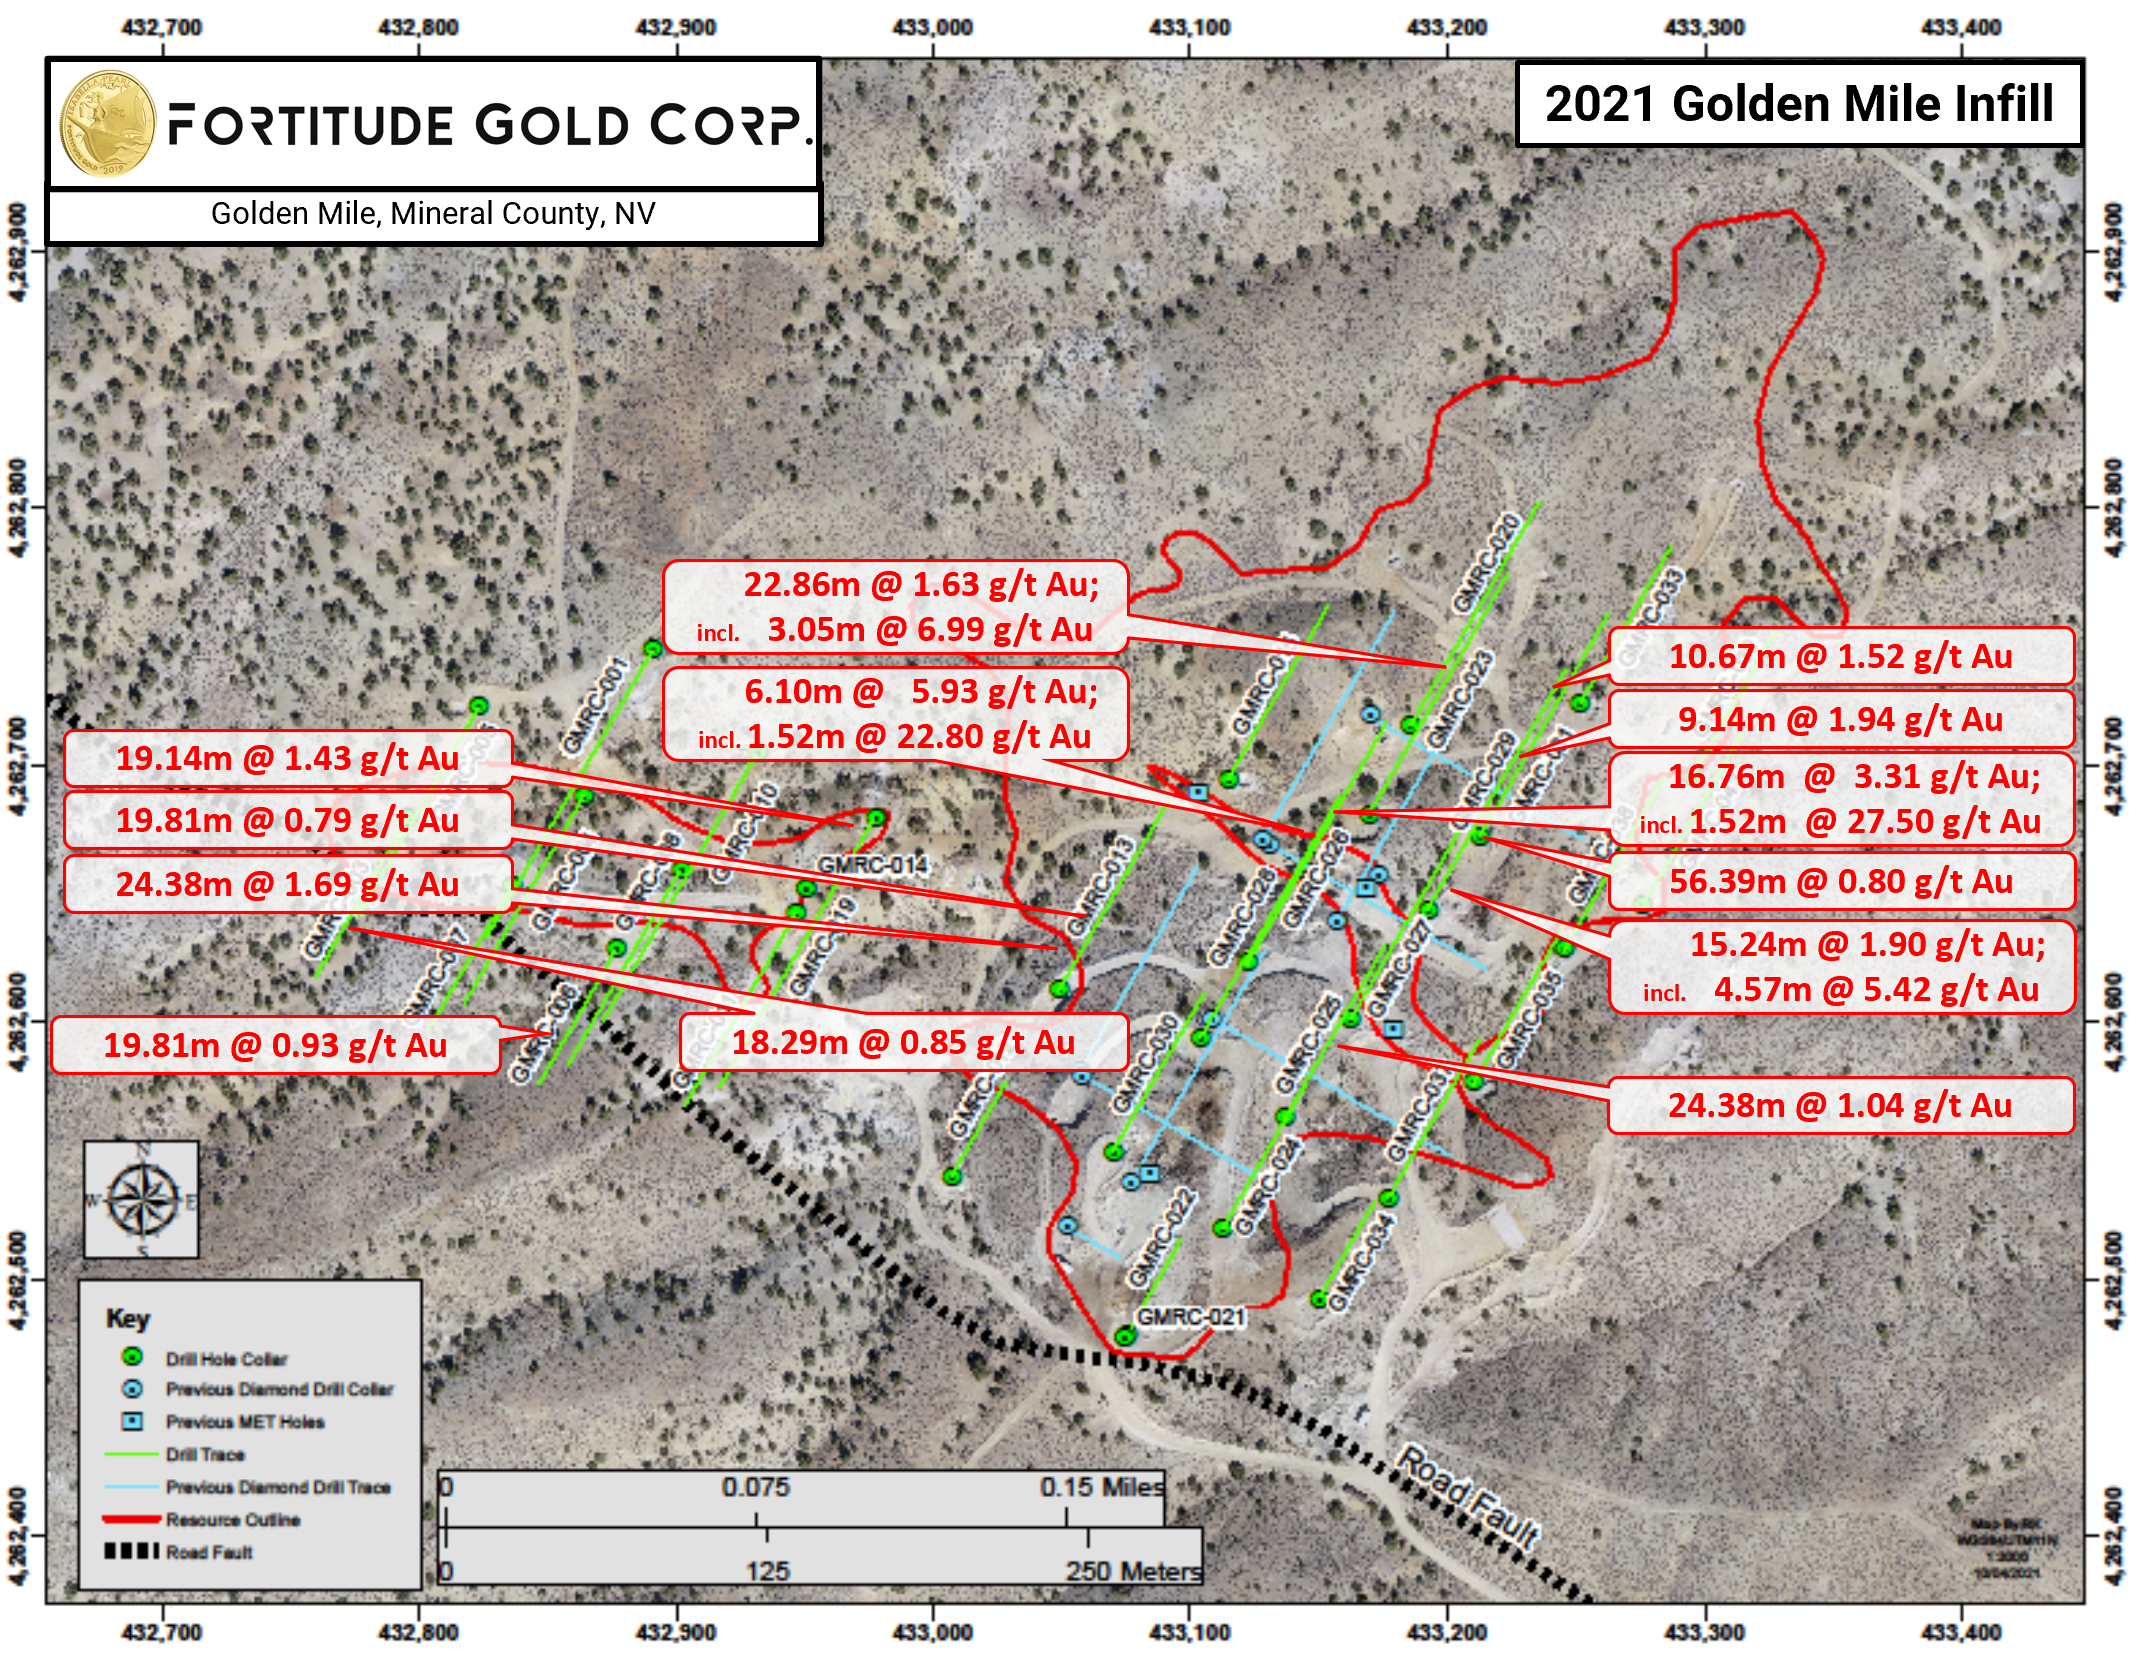 Fortitude Gold Corporation, Monday, October 11, 2021, Press release picture